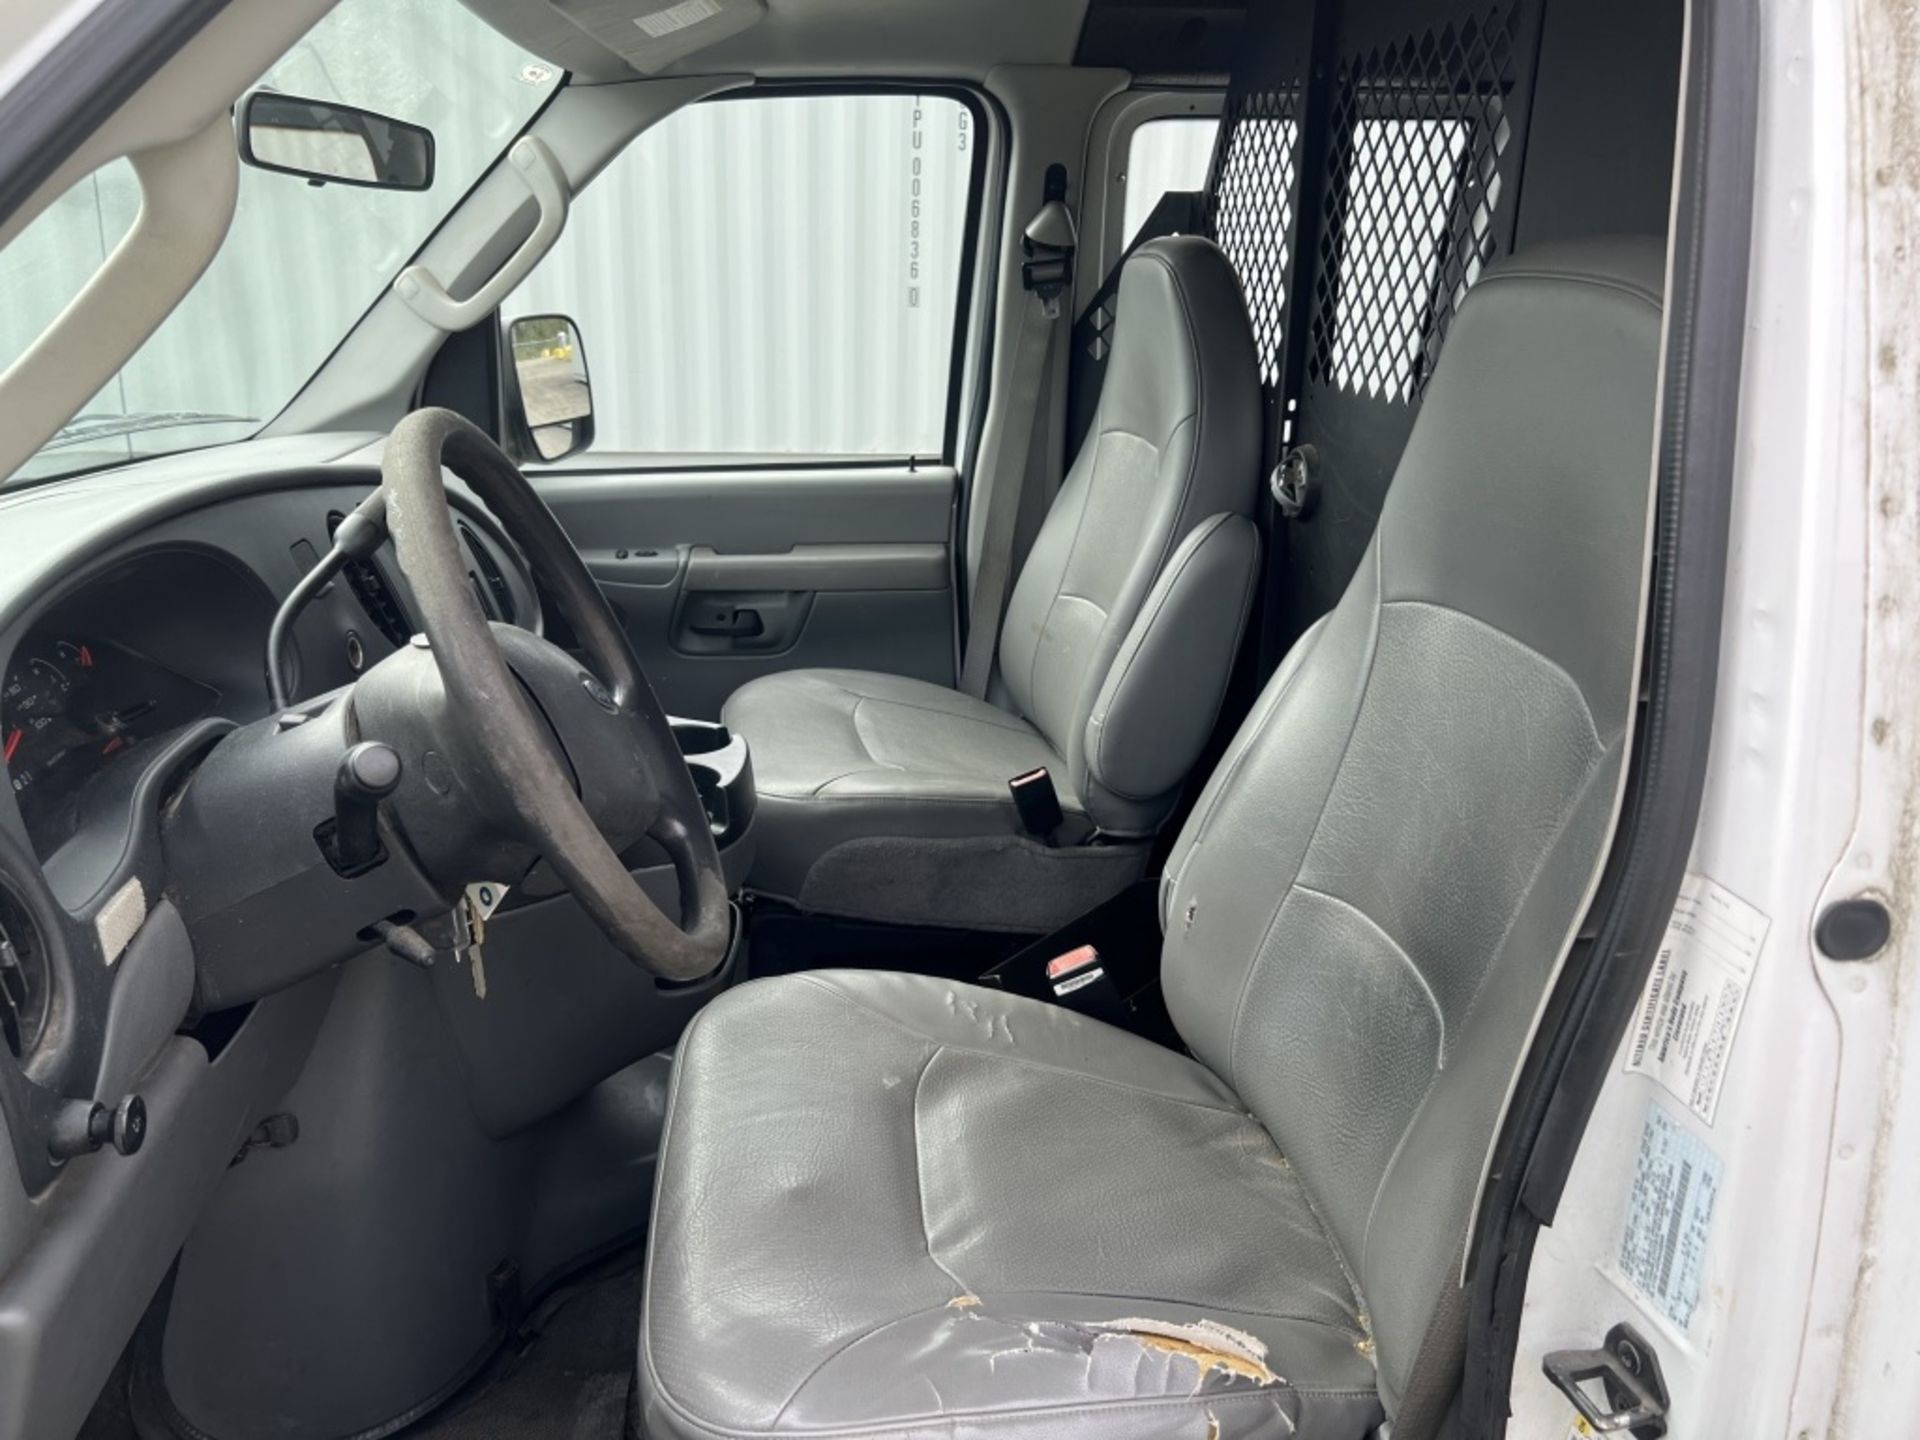 2006 Ford E150 Cargo Van - Image 15 of 21